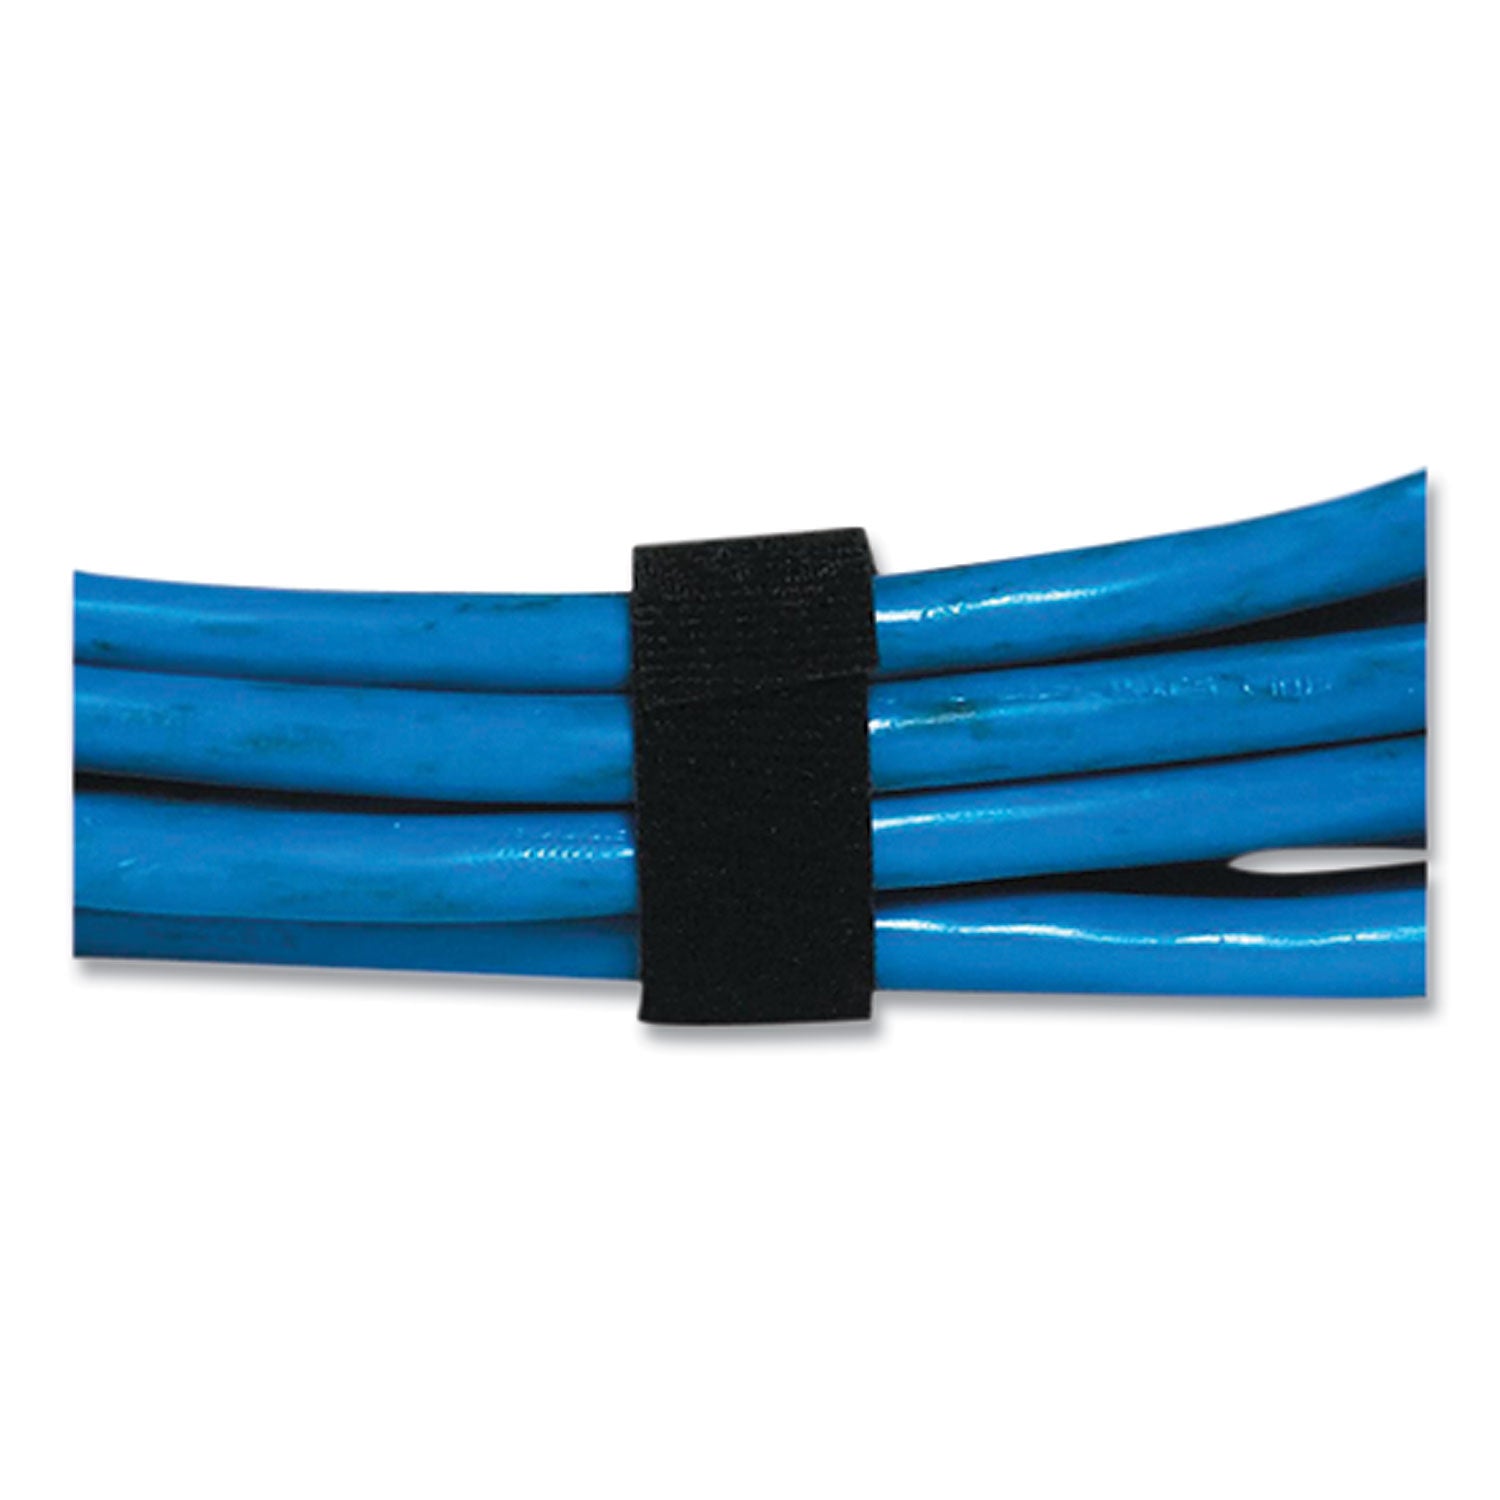 one-wrap-ties-and-straps-05-x-12-ft-black_vek189755 - 2